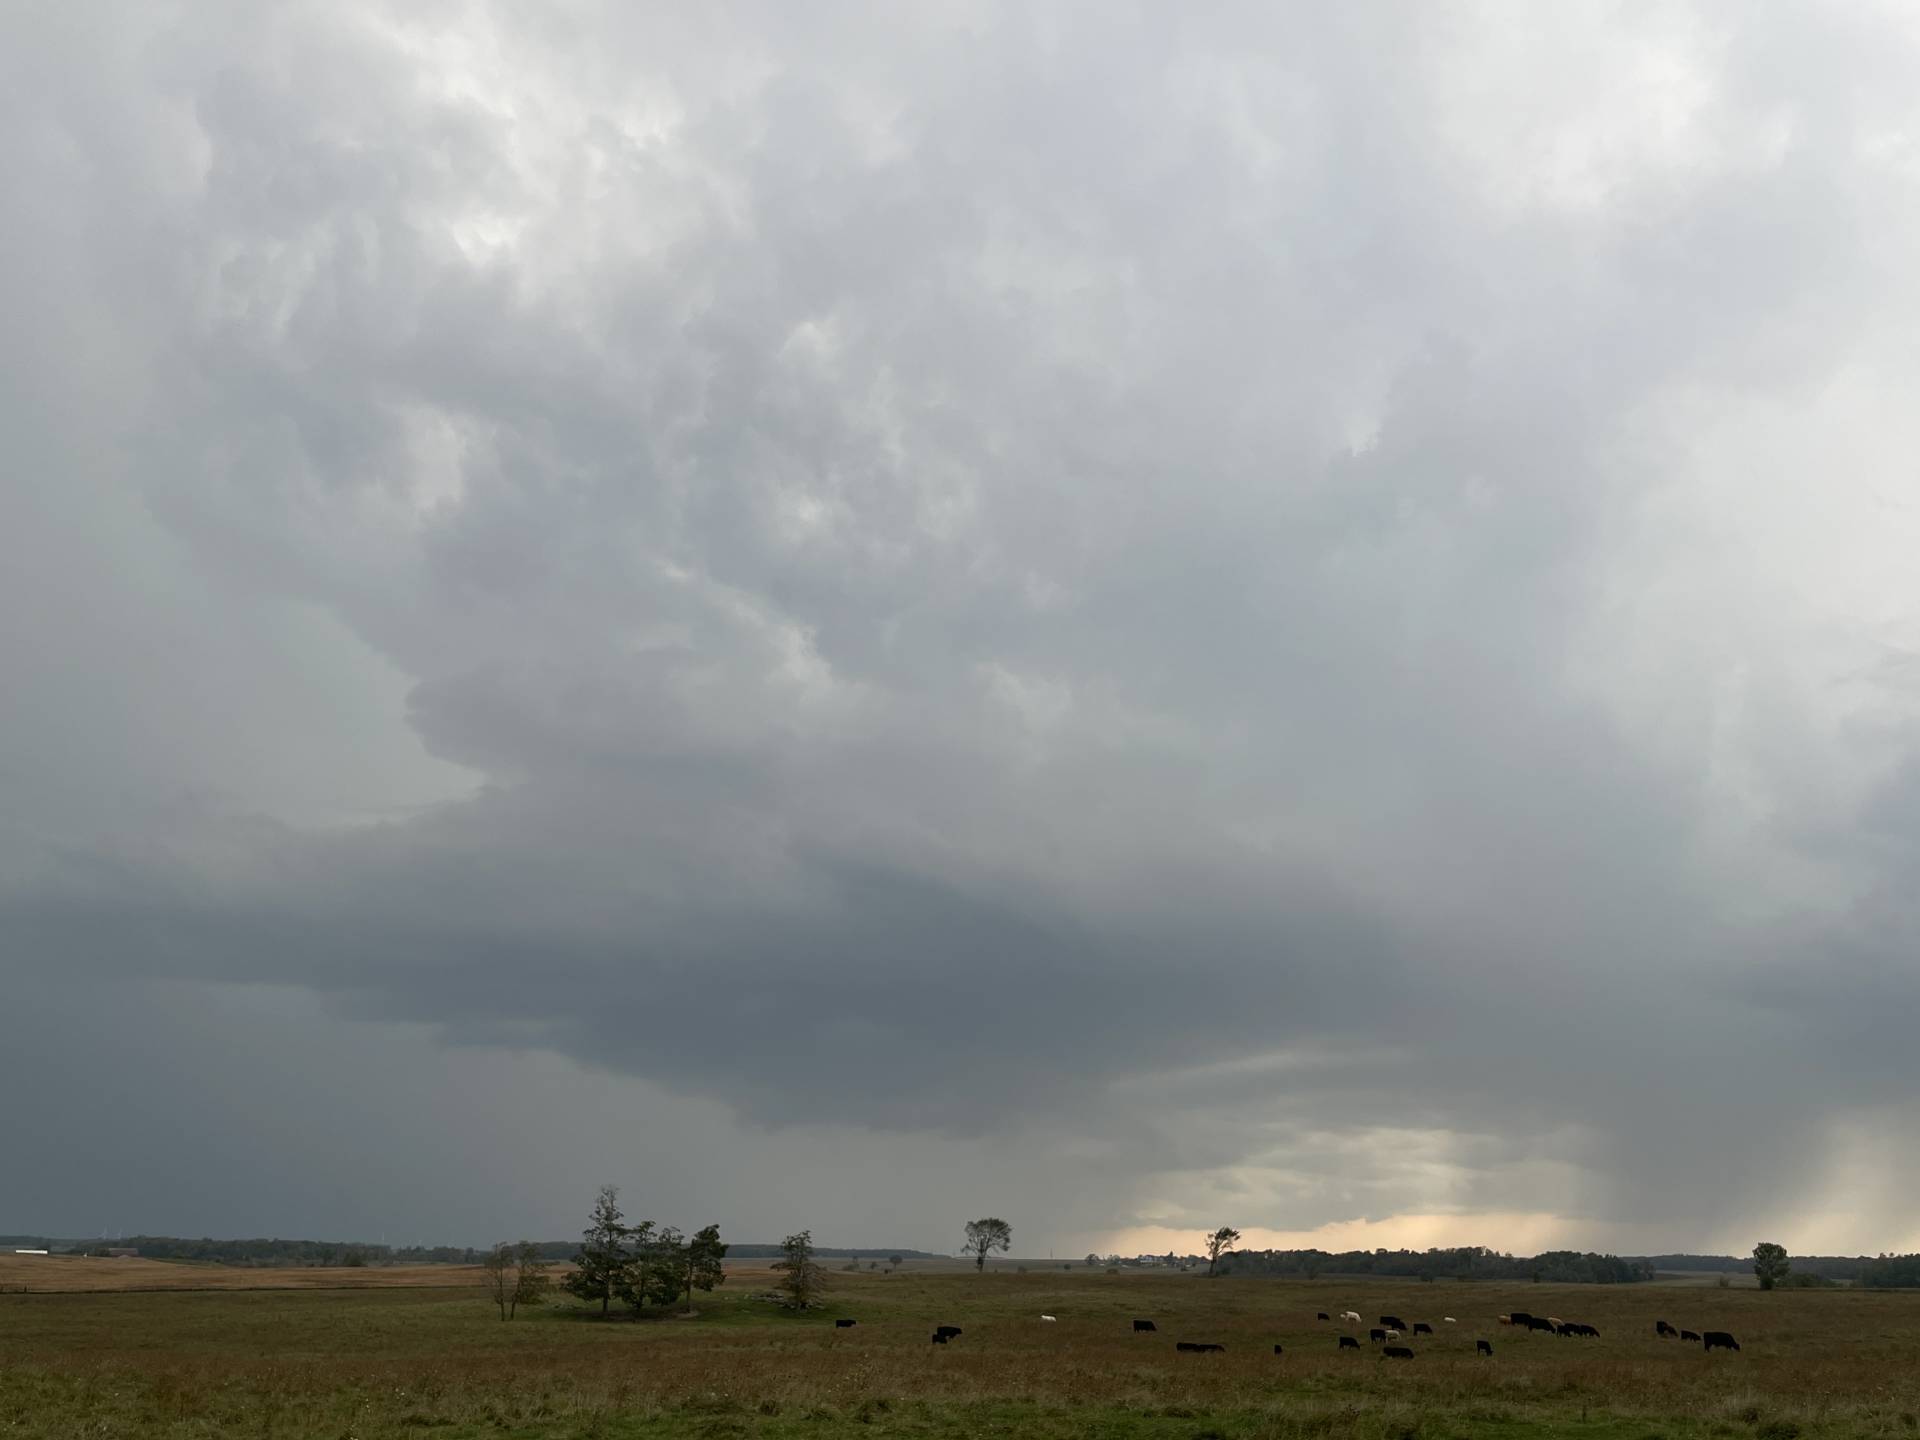 But if nice structure at Paisley, ON 05:50 PM #ONstorm